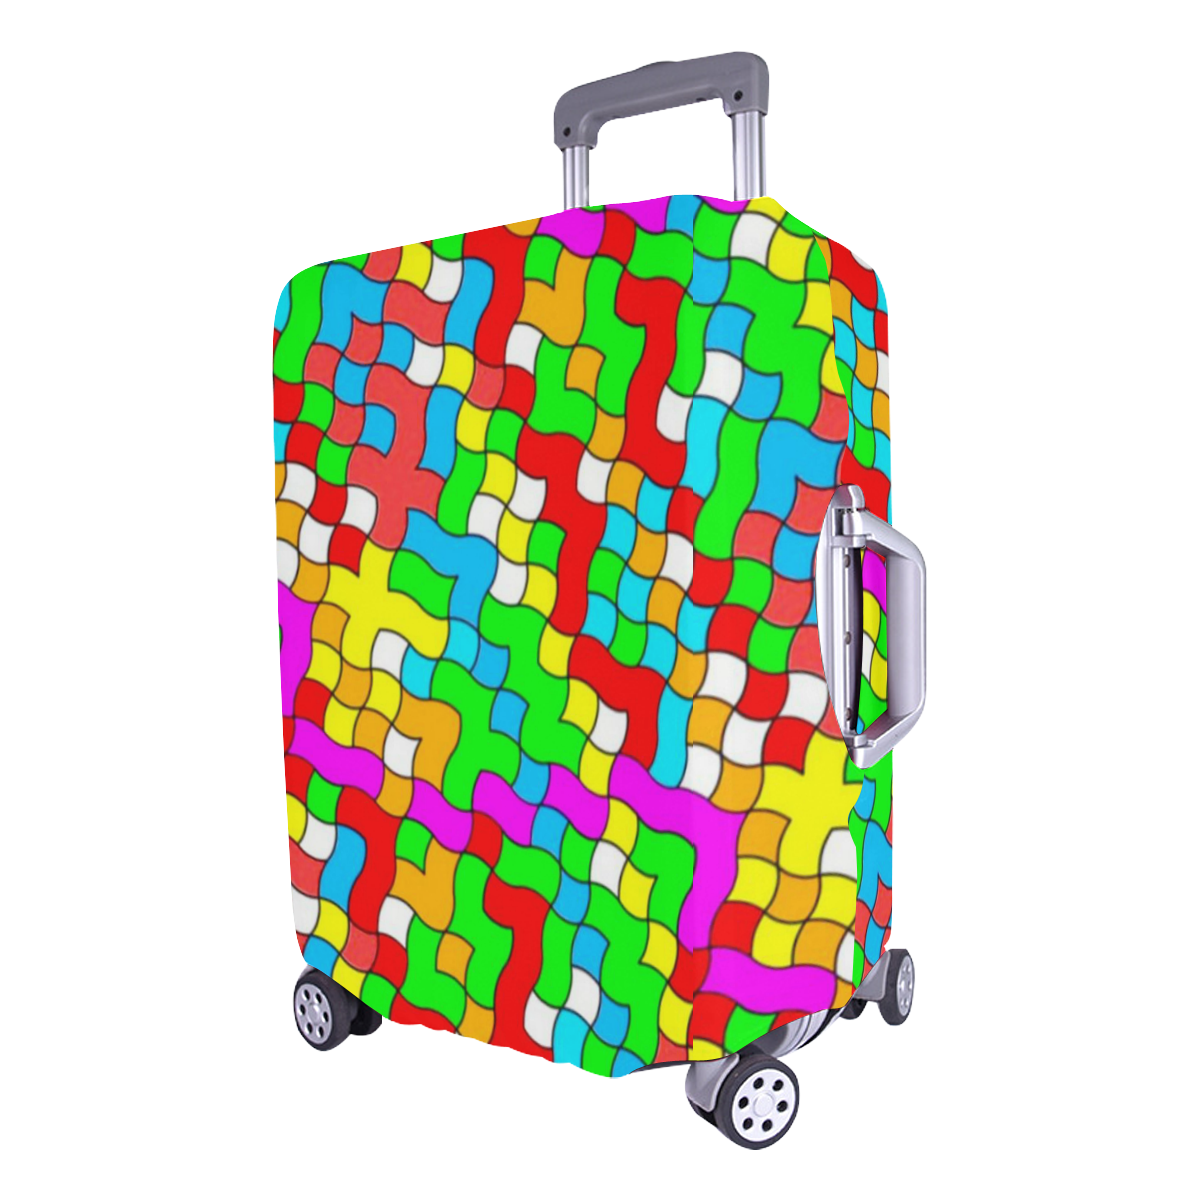 school party colorful Luggage Cover/Large 26"-28"